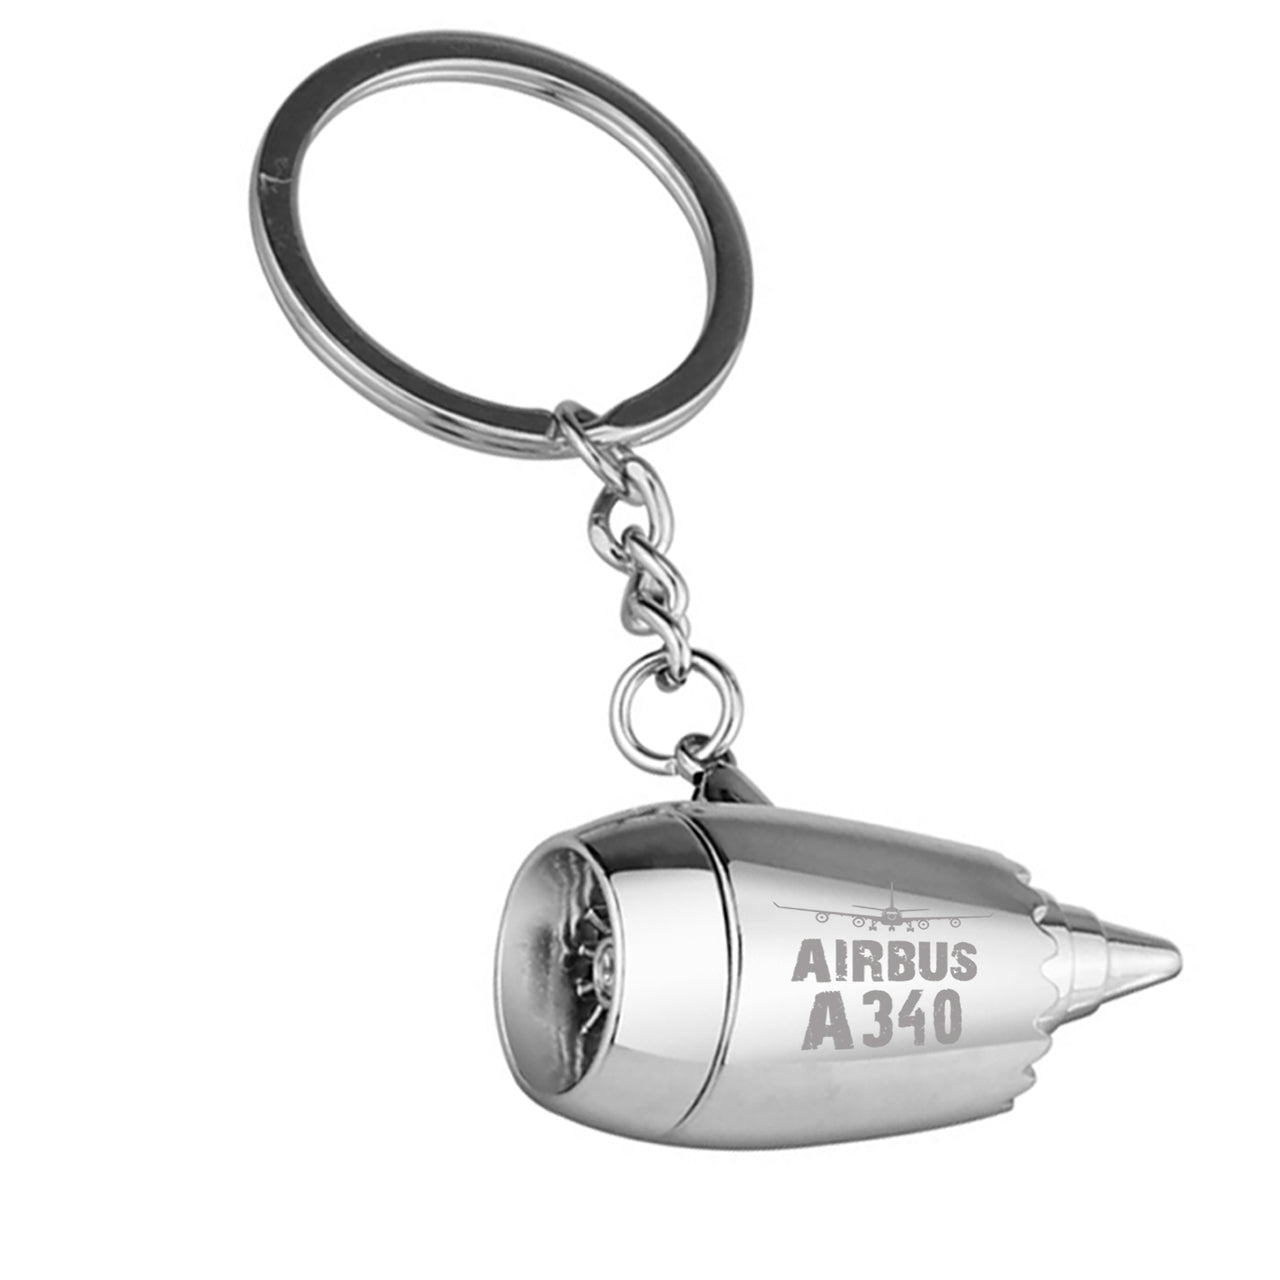 Airbus A340 & Plane Designed Airplane Jet Engine Shaped Key Chain